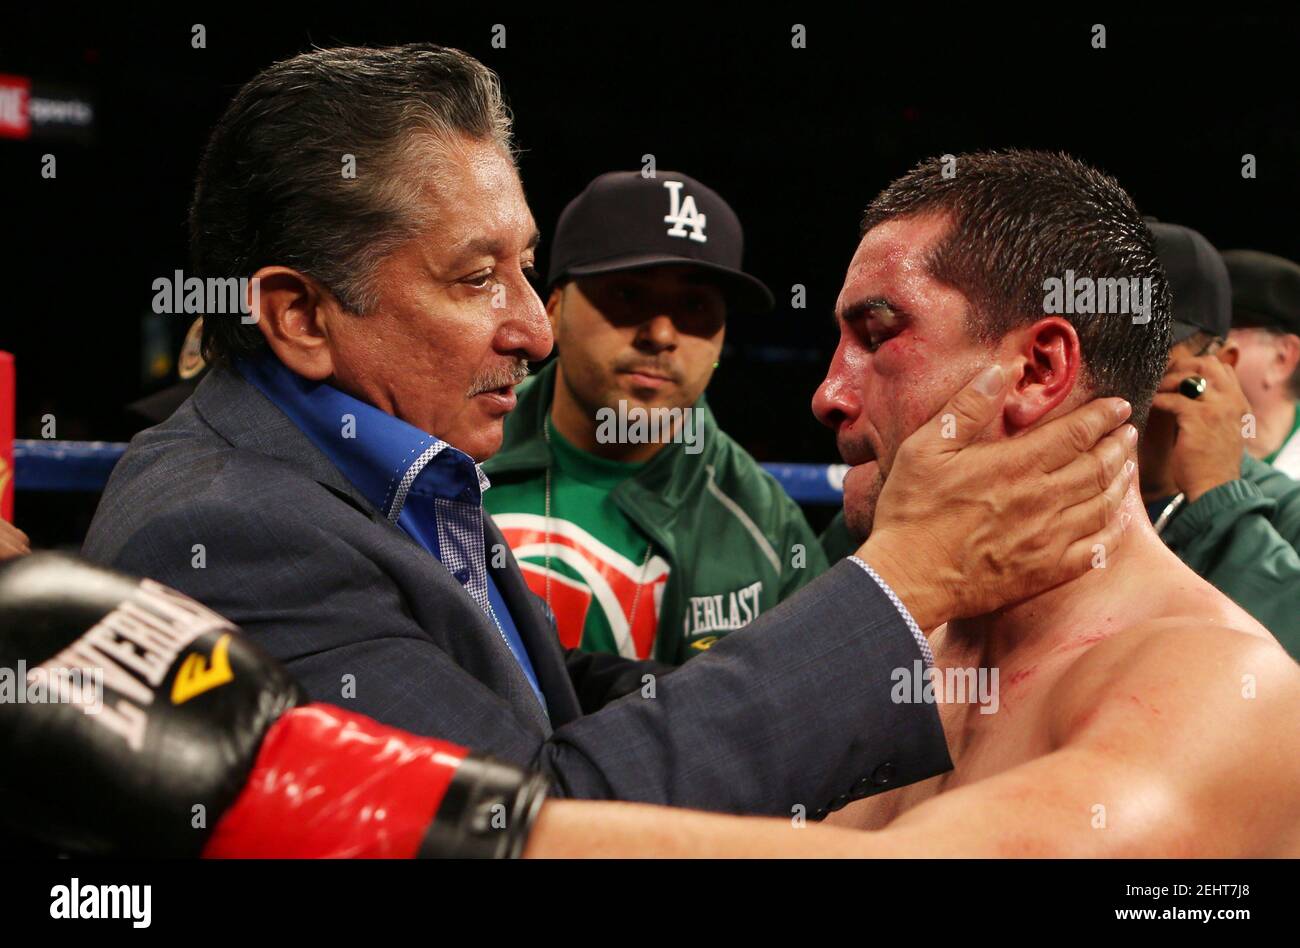 Boxing - Amir Khan v Carlos Molina WBC Silver Super Lightweight Title  - Los Angeles Memorial Sports Arena, Los Angeles, California, United States of America - 15/12/12  Carlos Molina dejected with family after fight  Mandatory Credit: Action Images / Lee Smith Stock Photo